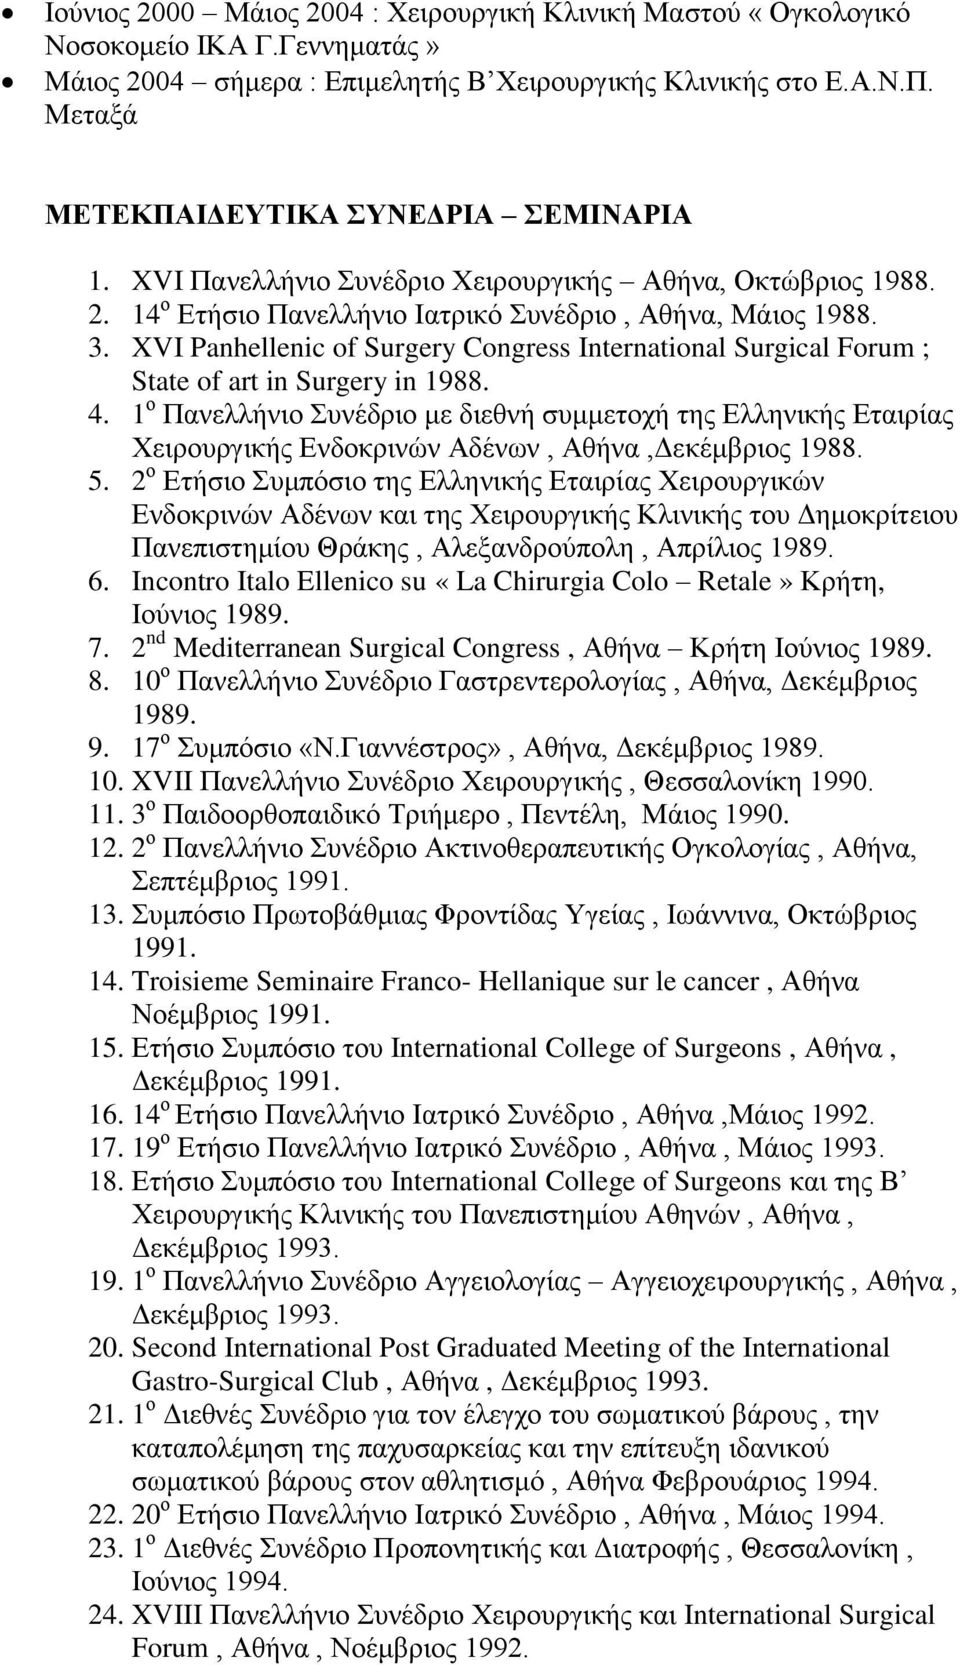 XVI Panhellenic of Surgery Congress International Surgical Forum ; State of art in Surgery in 1988. 4.